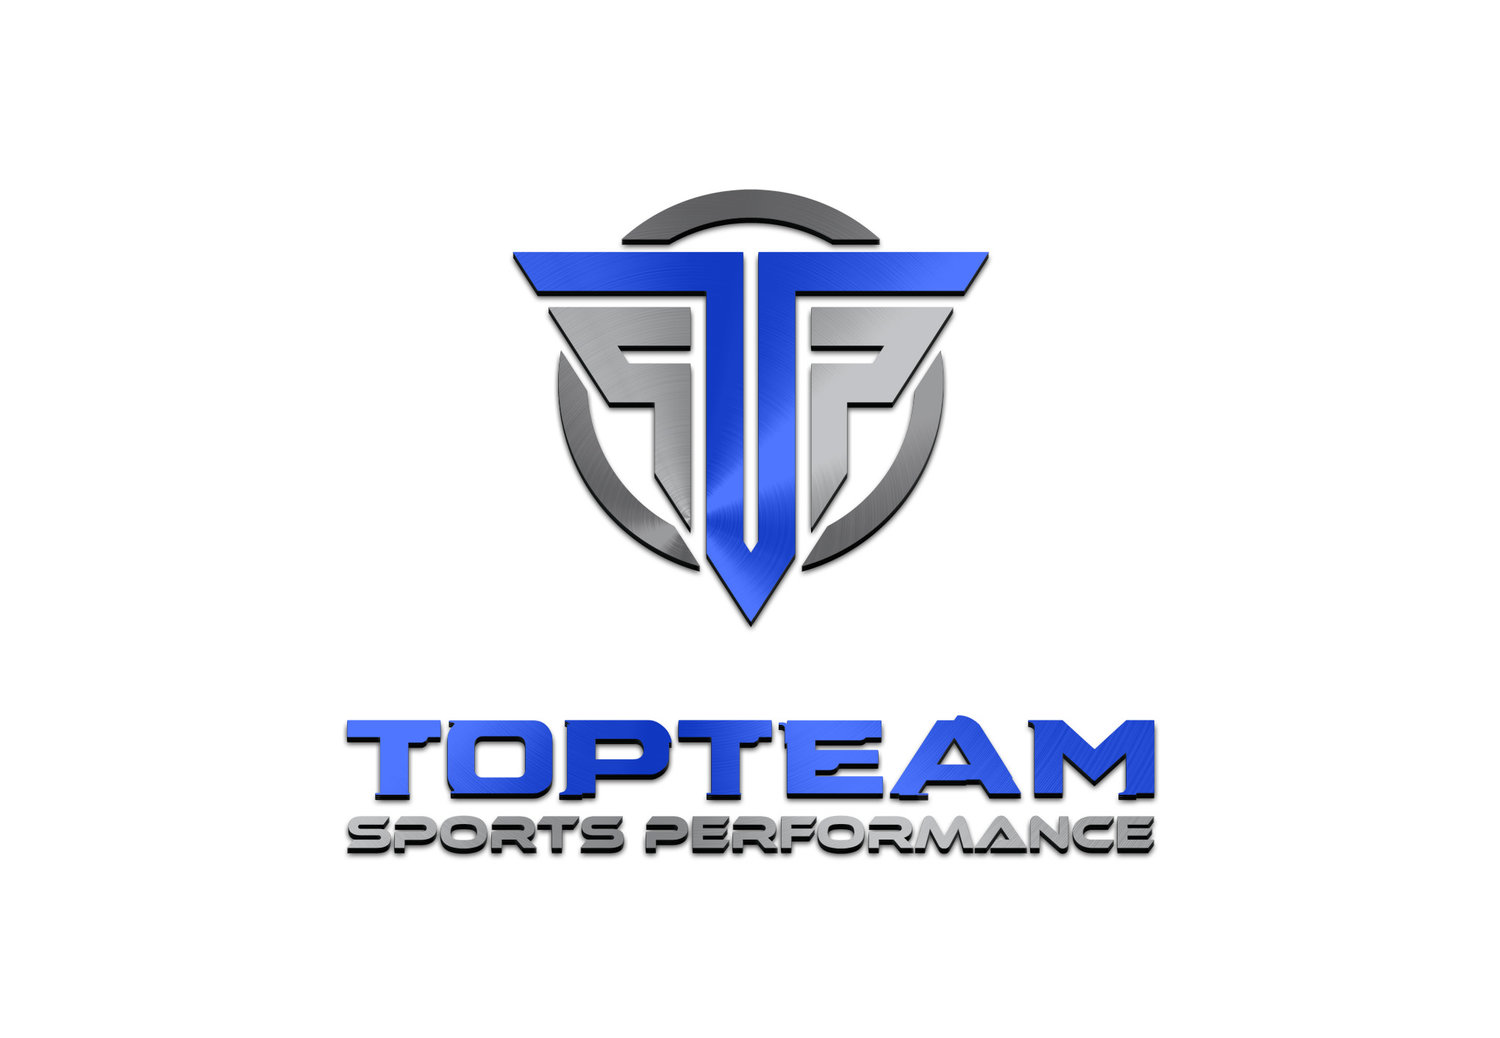 TOPTEAM Sports Performance